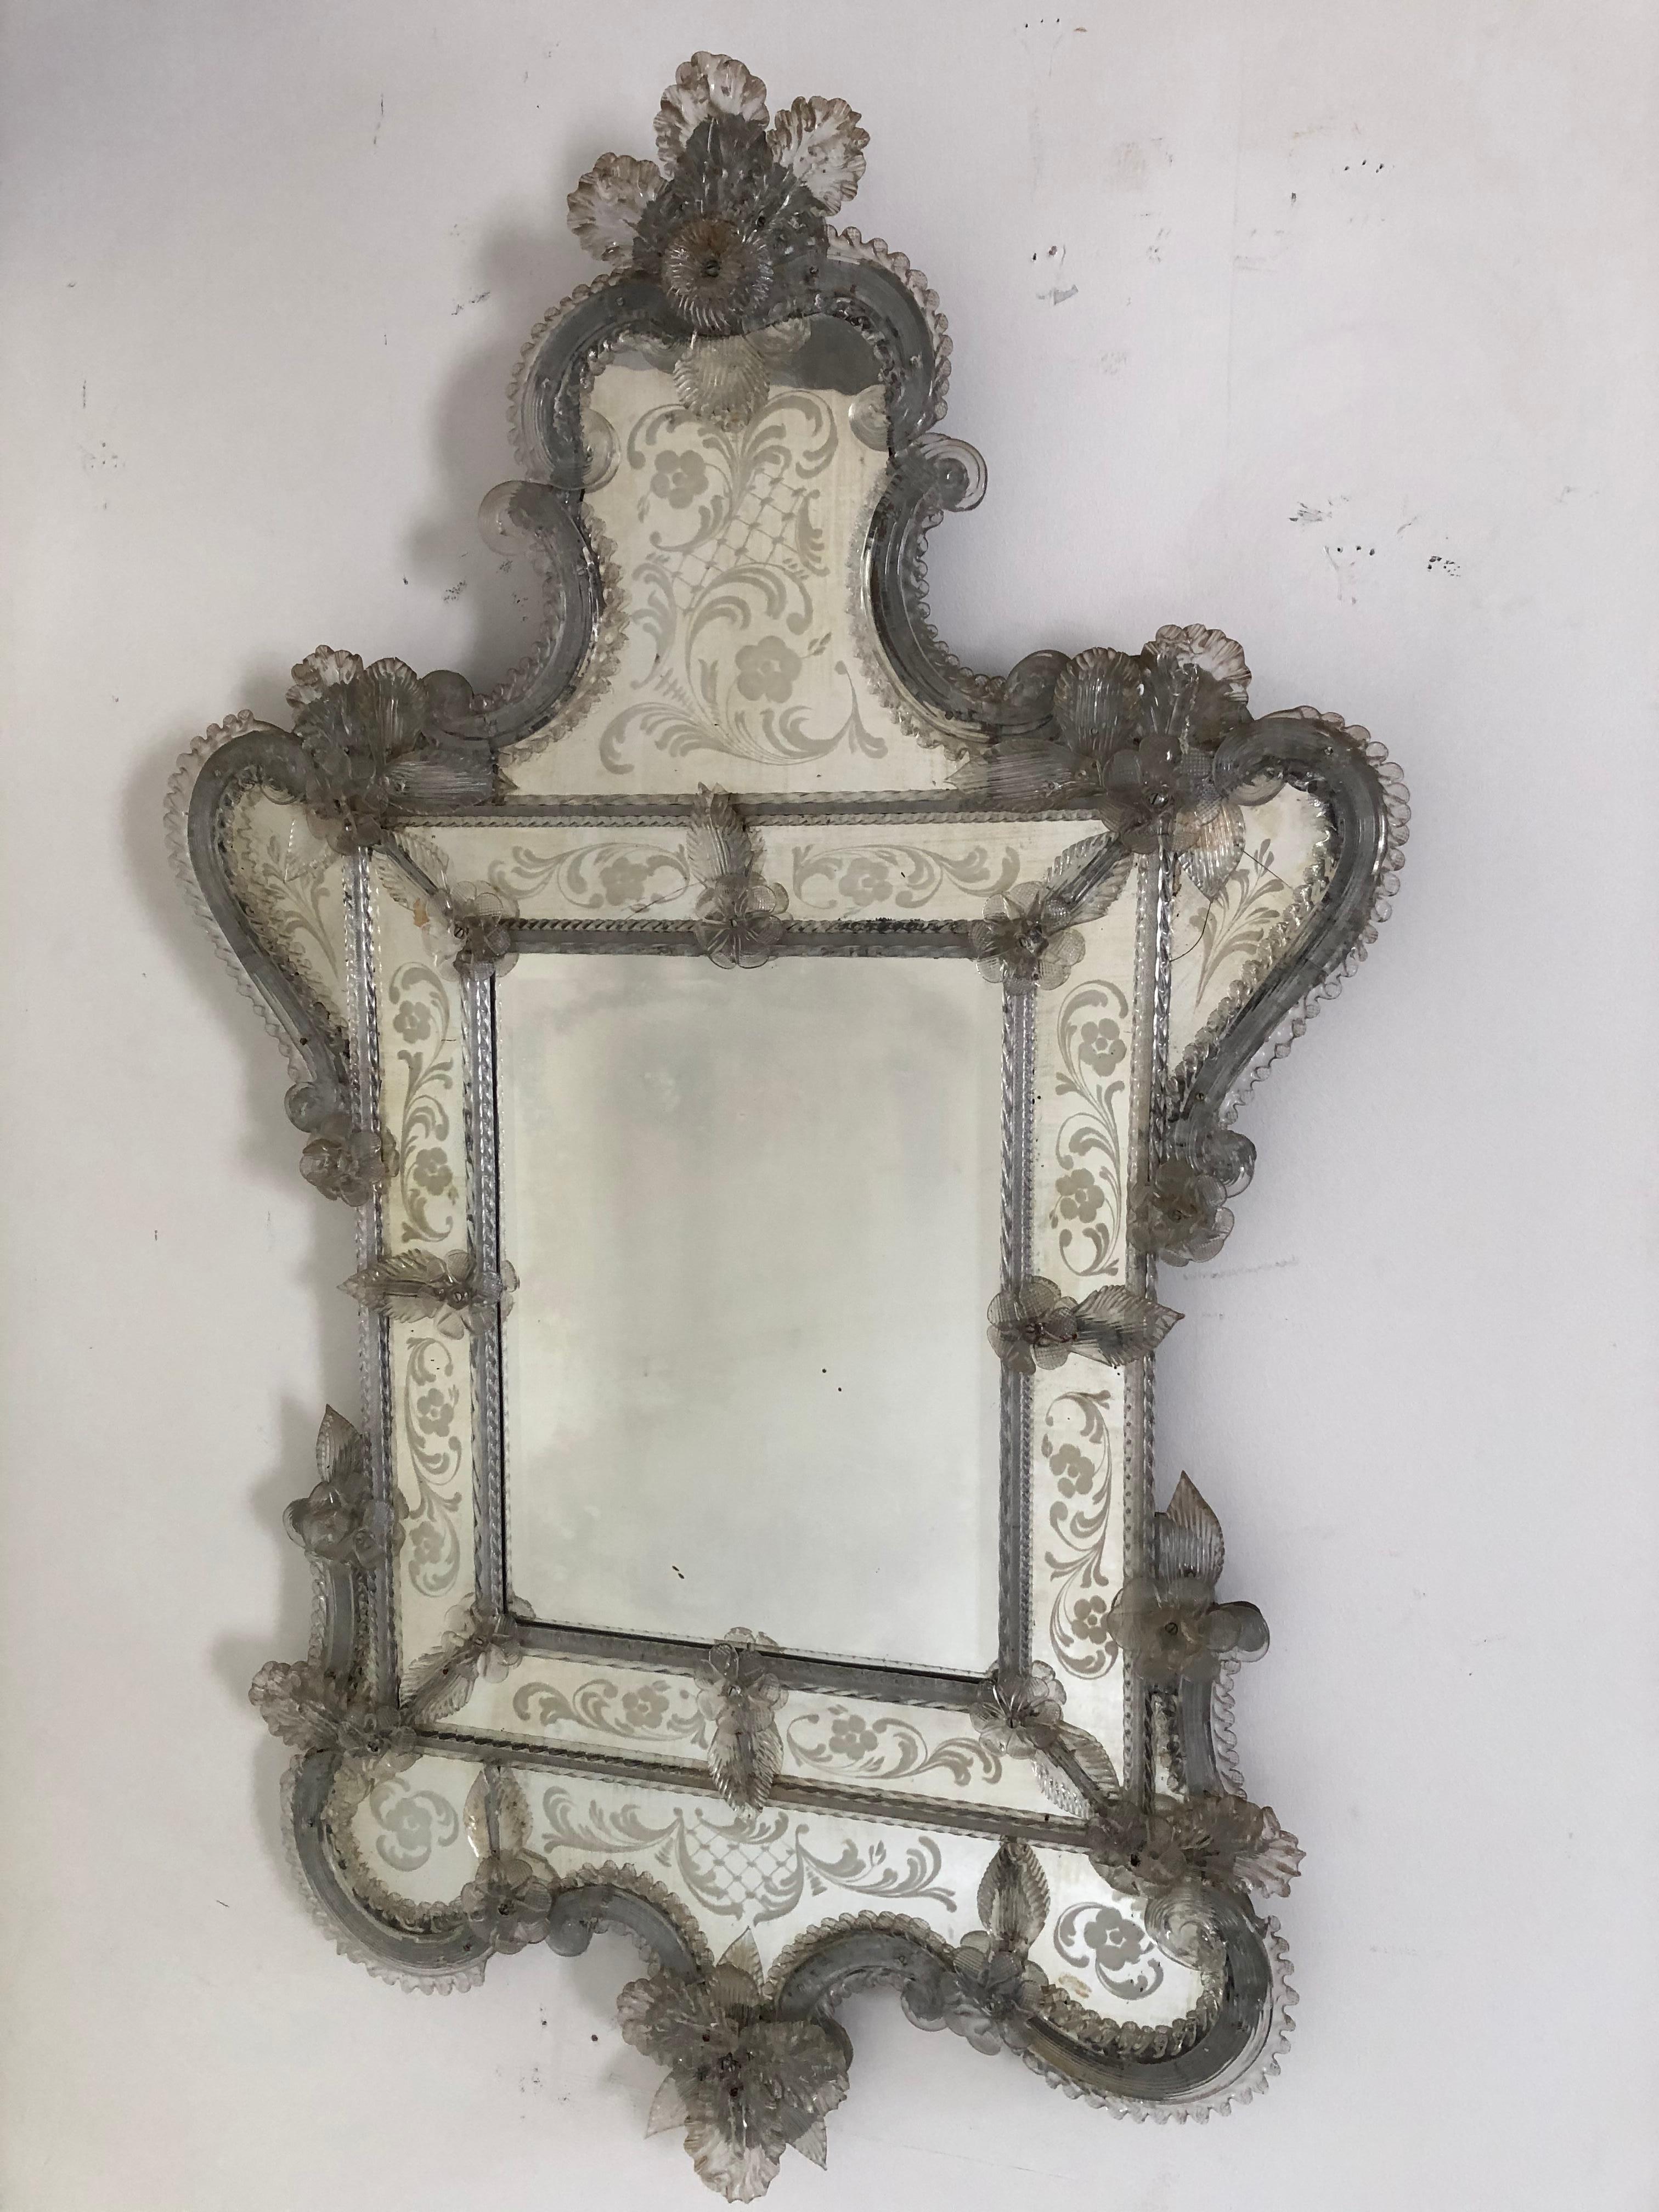 Antique Venetian etched and blown glass mirror, glass flowers and graceful curved shape and canopy decorative top, some distressing and small cracks to smaller panel.